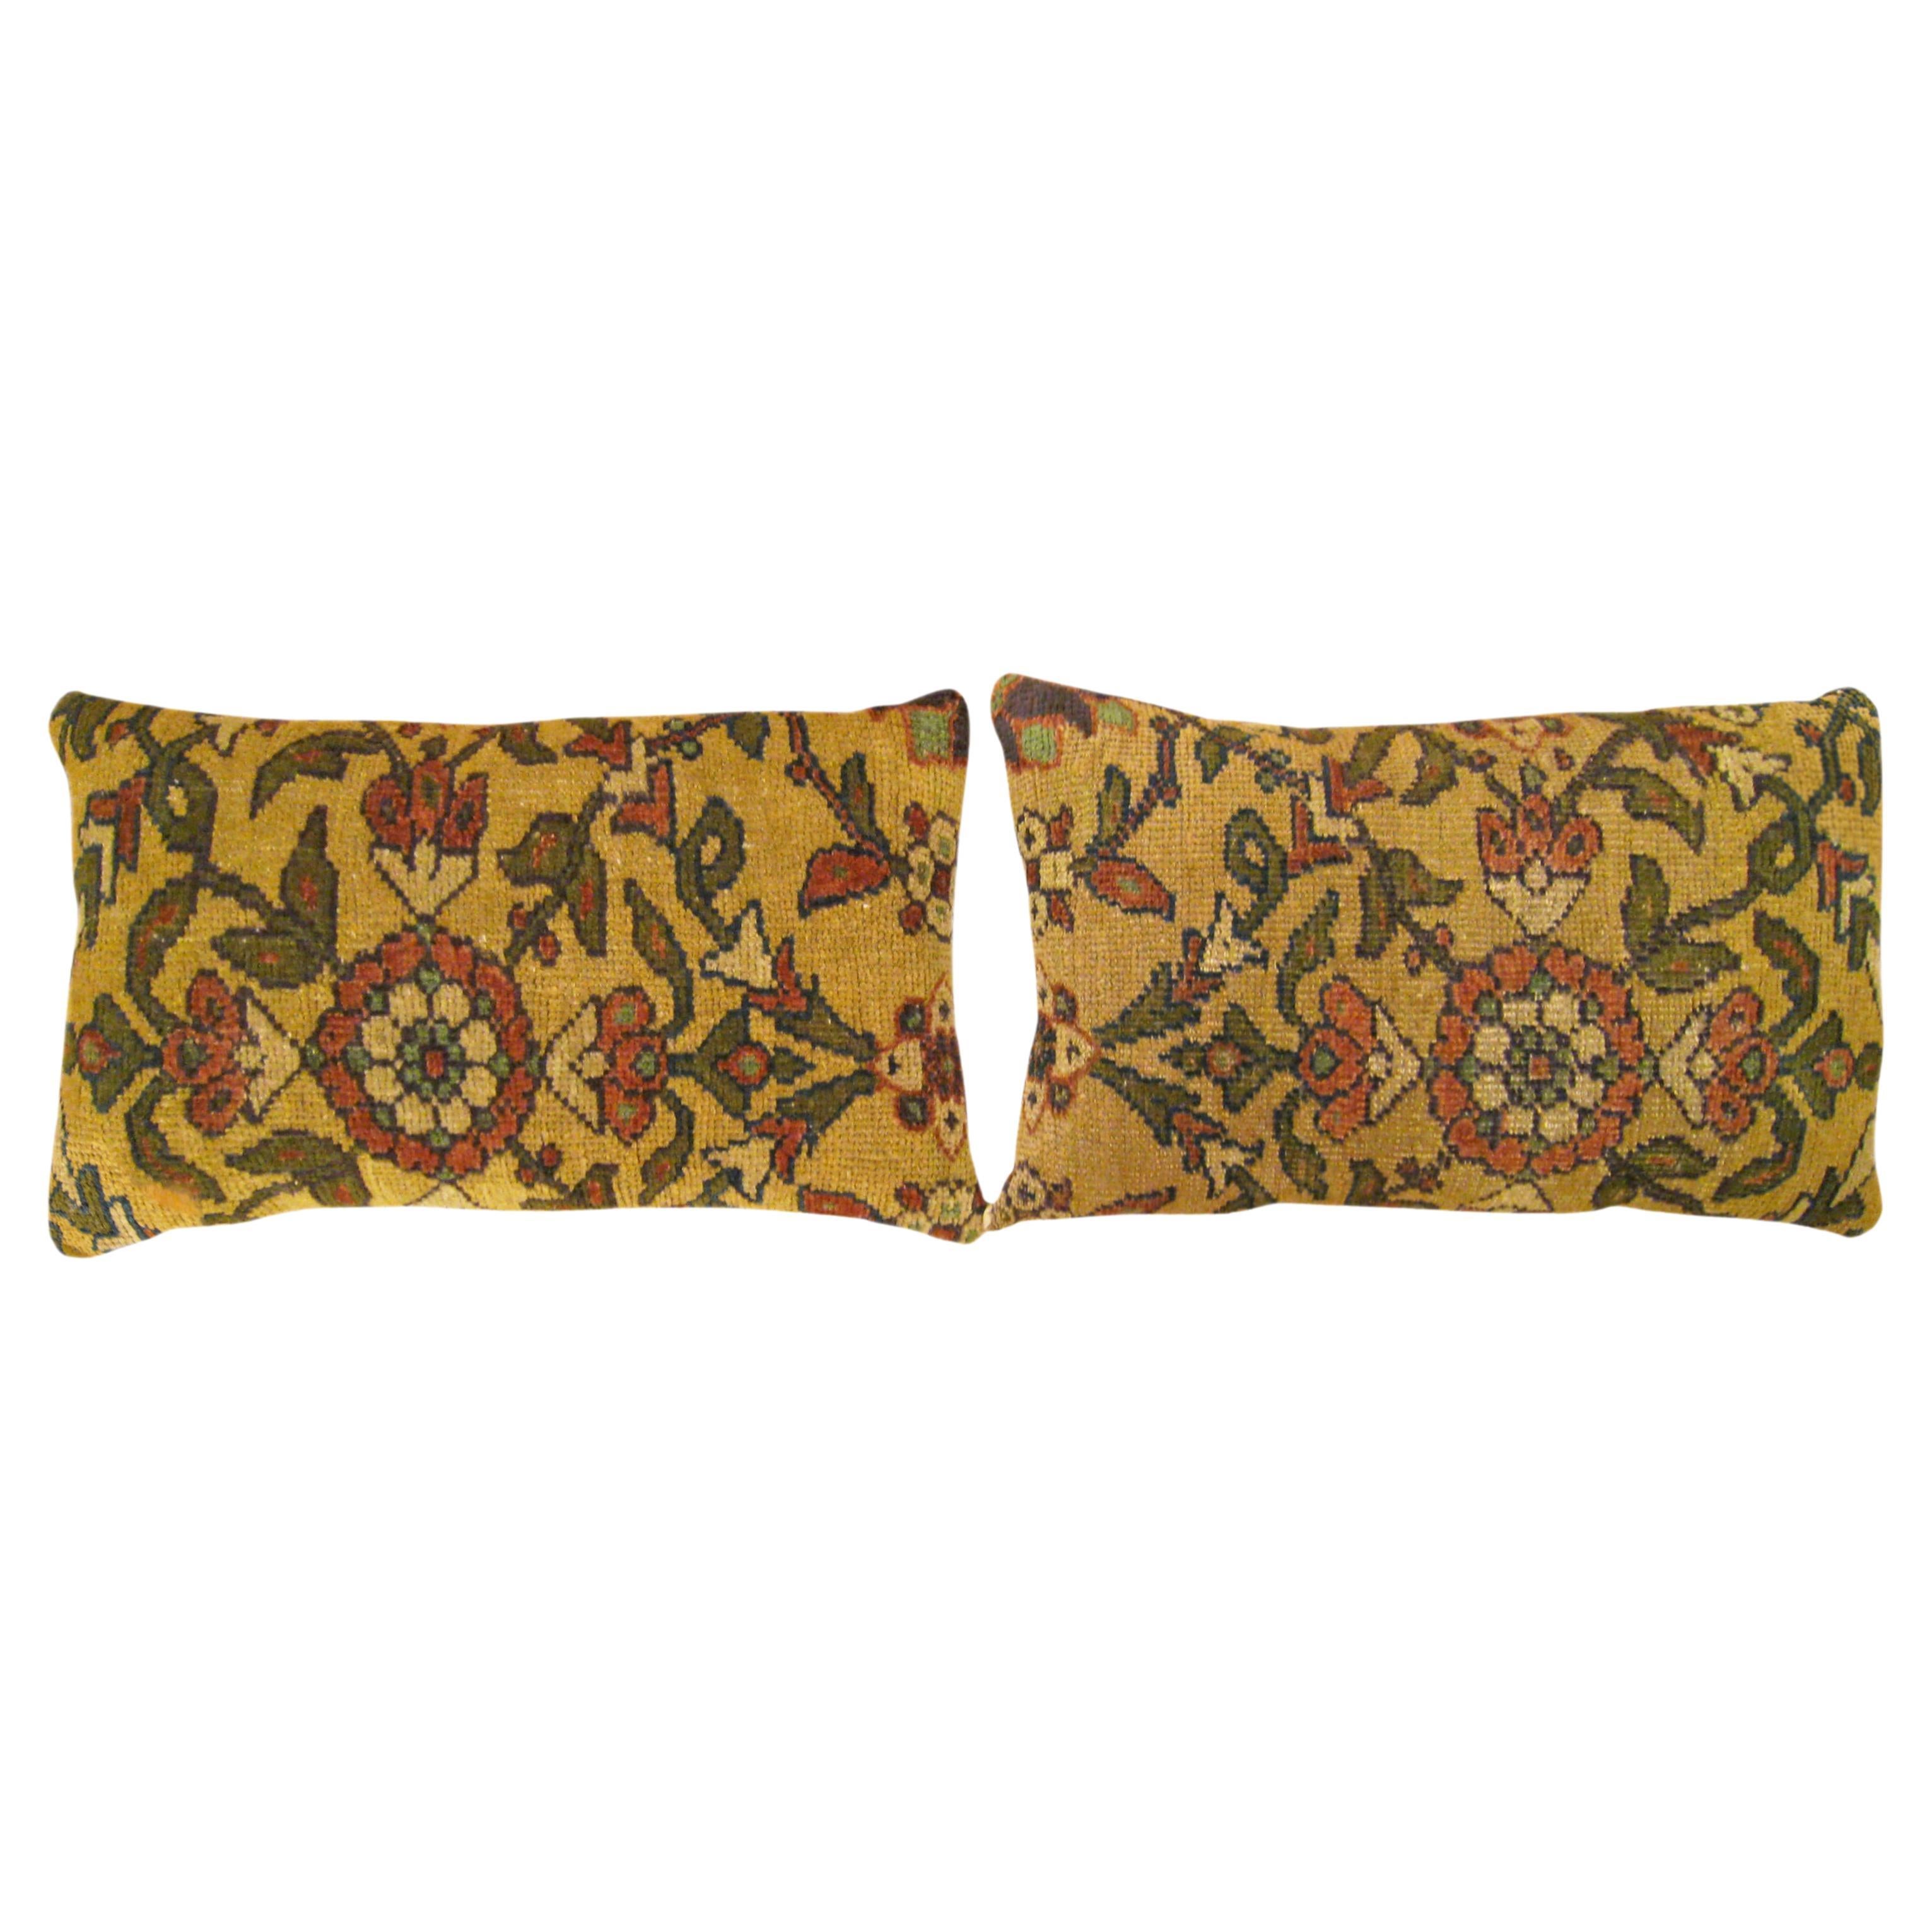 Pair of Decorative Antique Persian Sultanabad Carpet Pillows with Floral